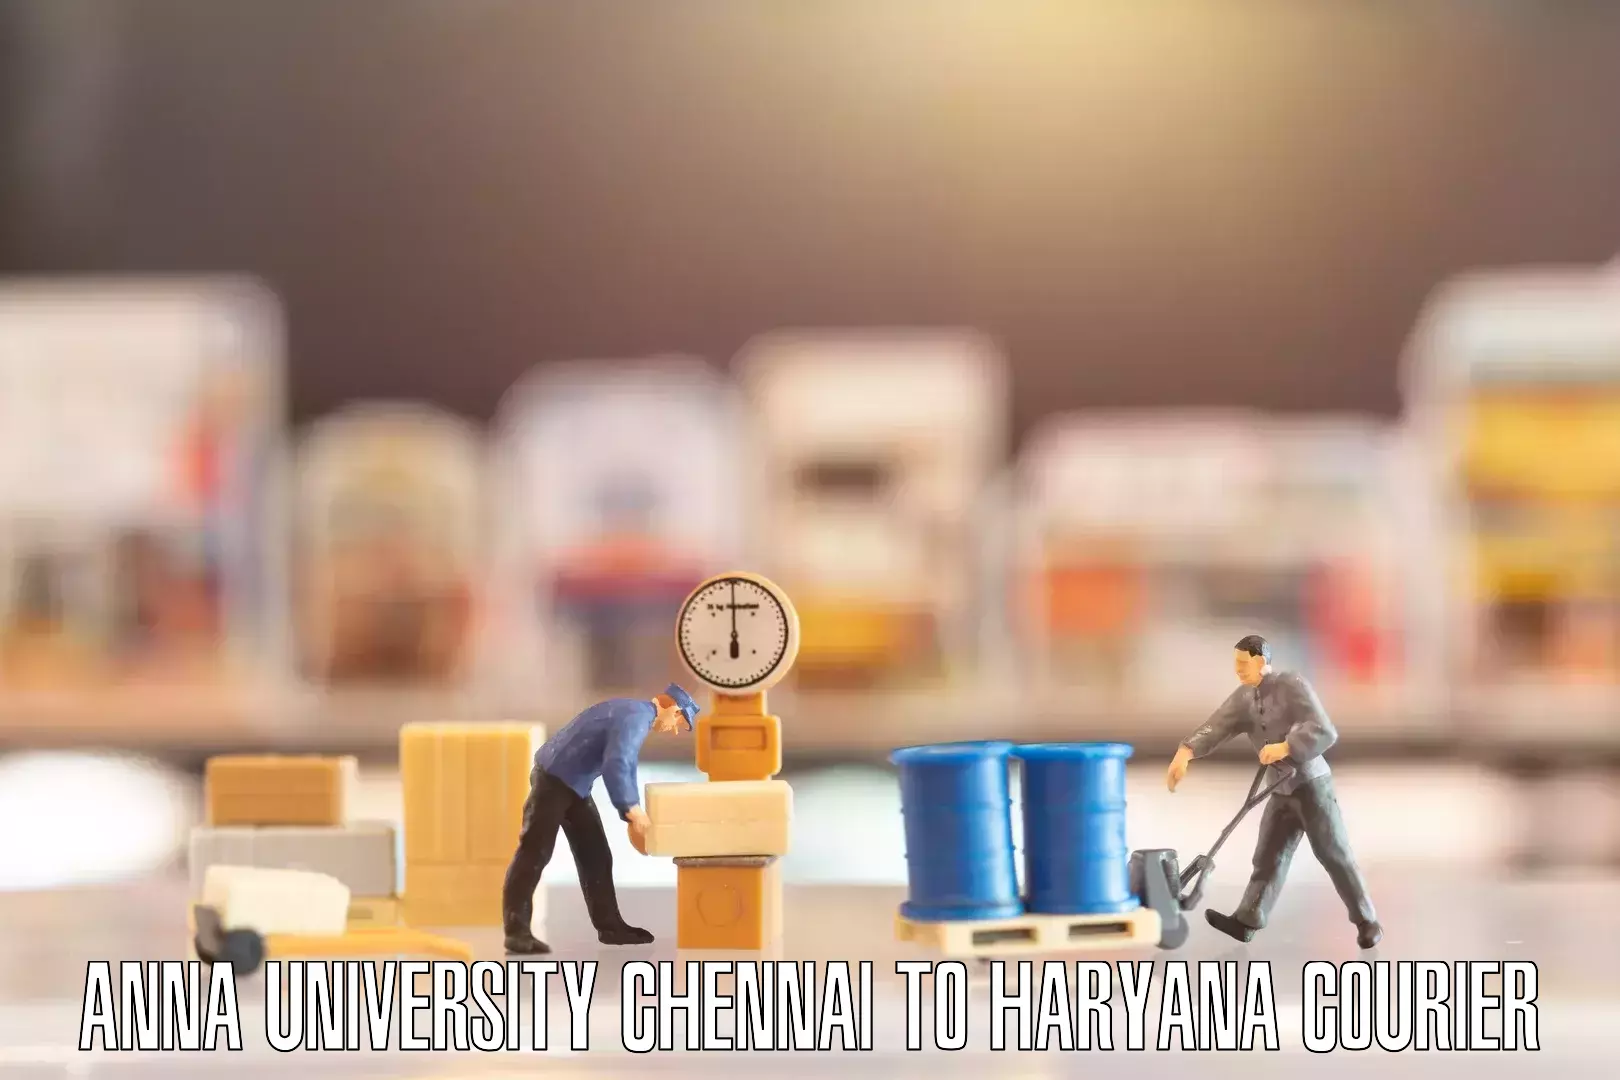 Nationwide moving services Anna University Chennai to NCR Haryana